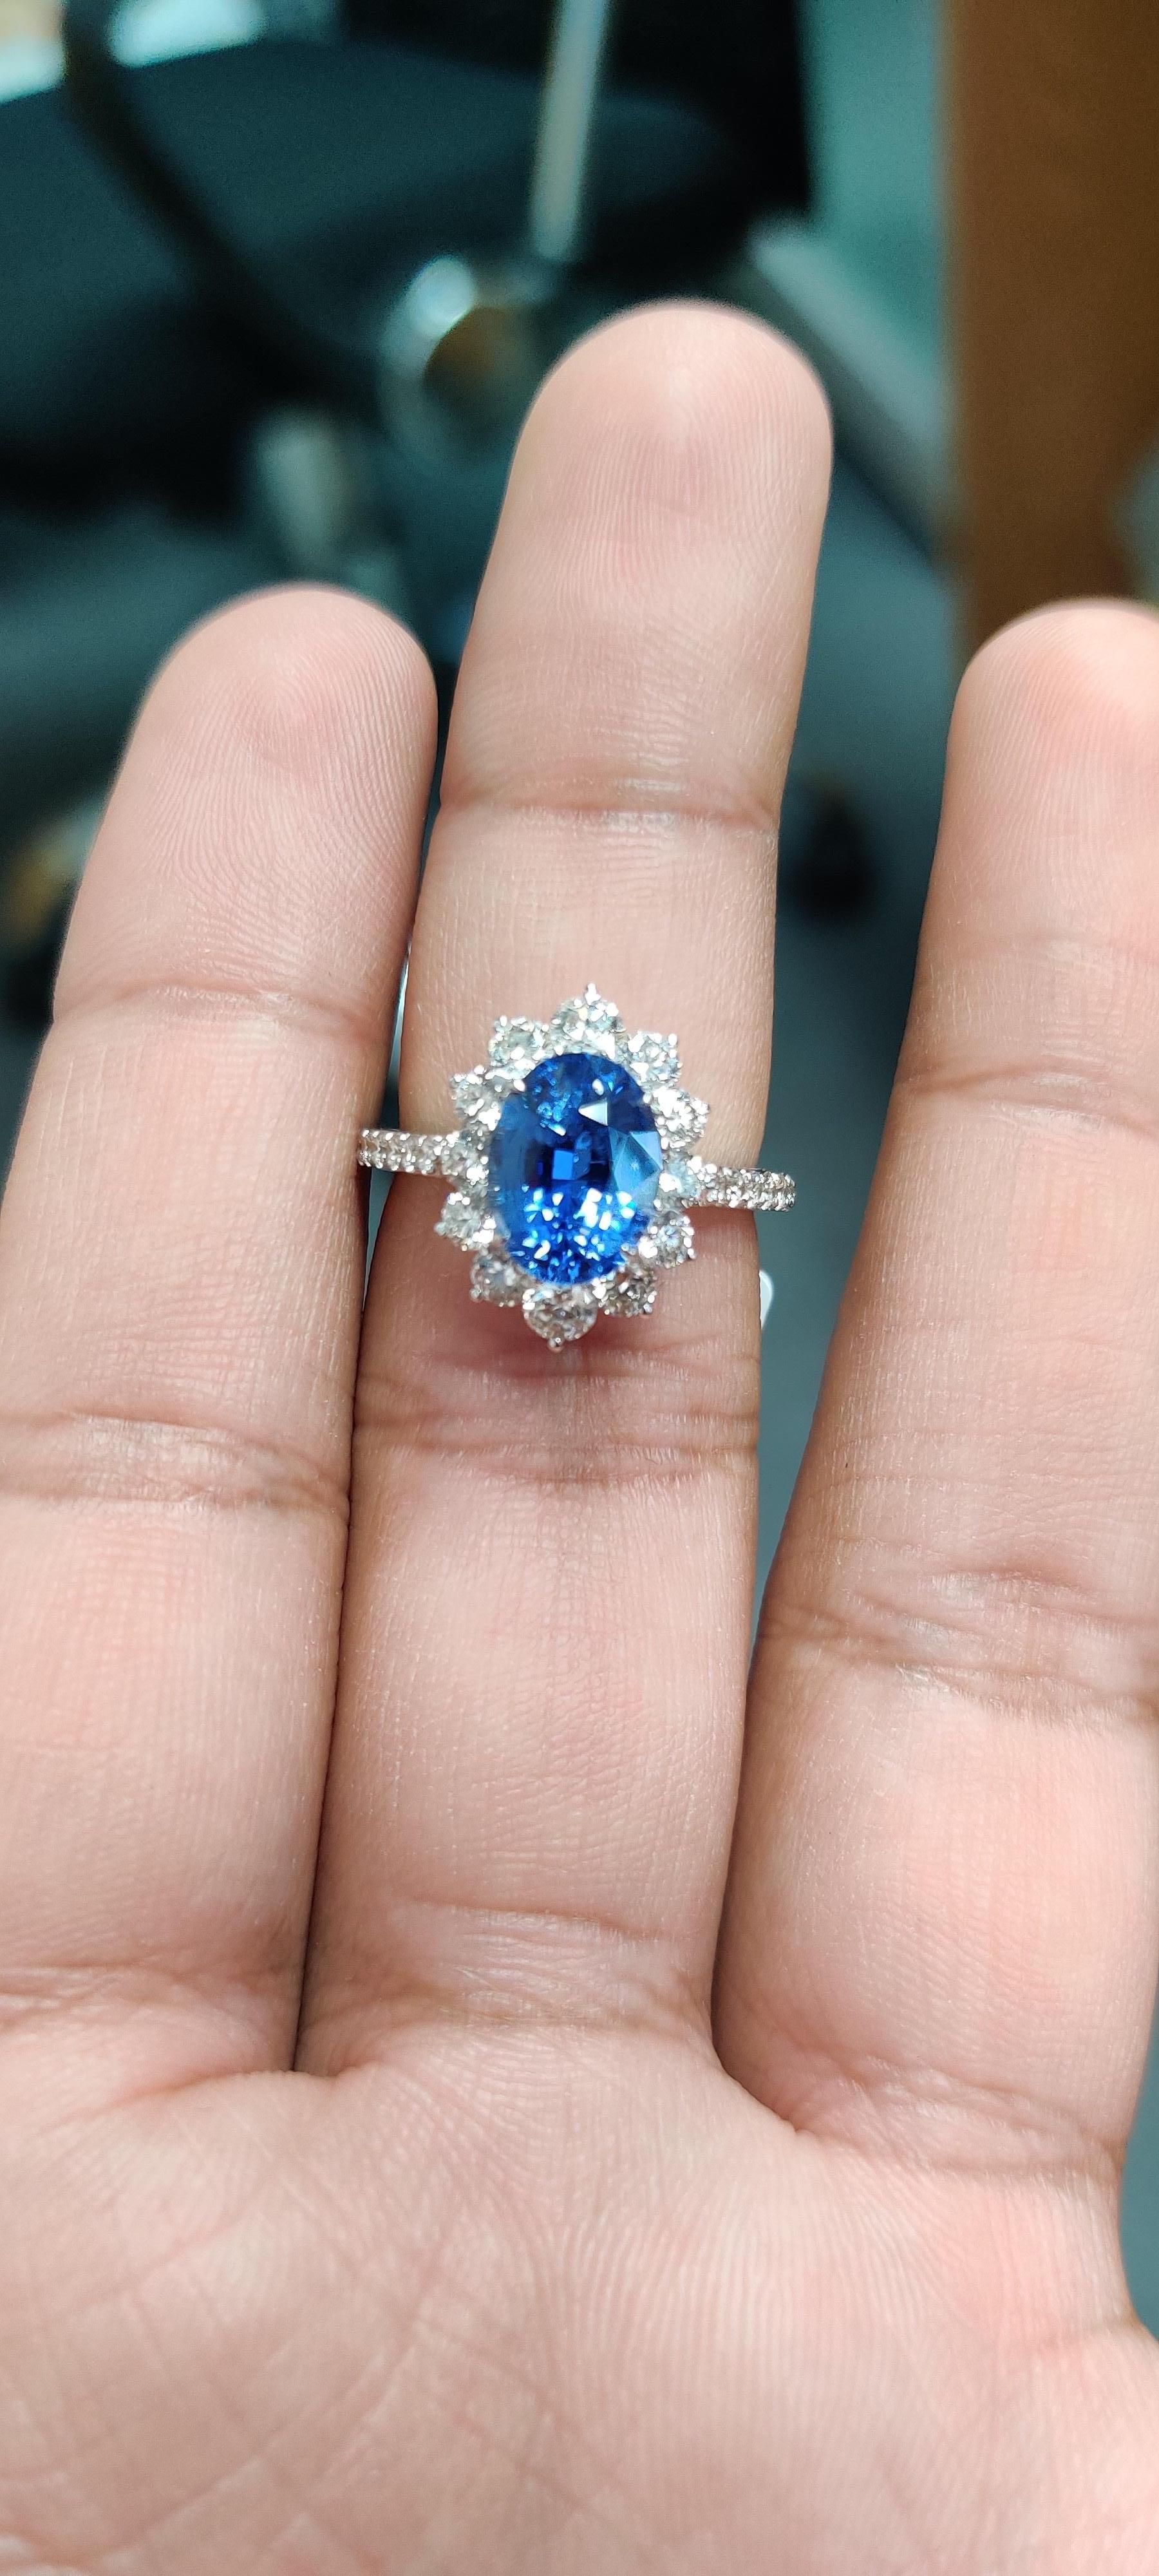 Introducing our captivating 18K Gold Oval Sapphire Ring, a timeless masterpiece of elegance and luxury. This exquisite ring features a breathtaking 3.66 carat oval sapphire, sourced from Sri Lanka, renowned for its deep royal blue color and